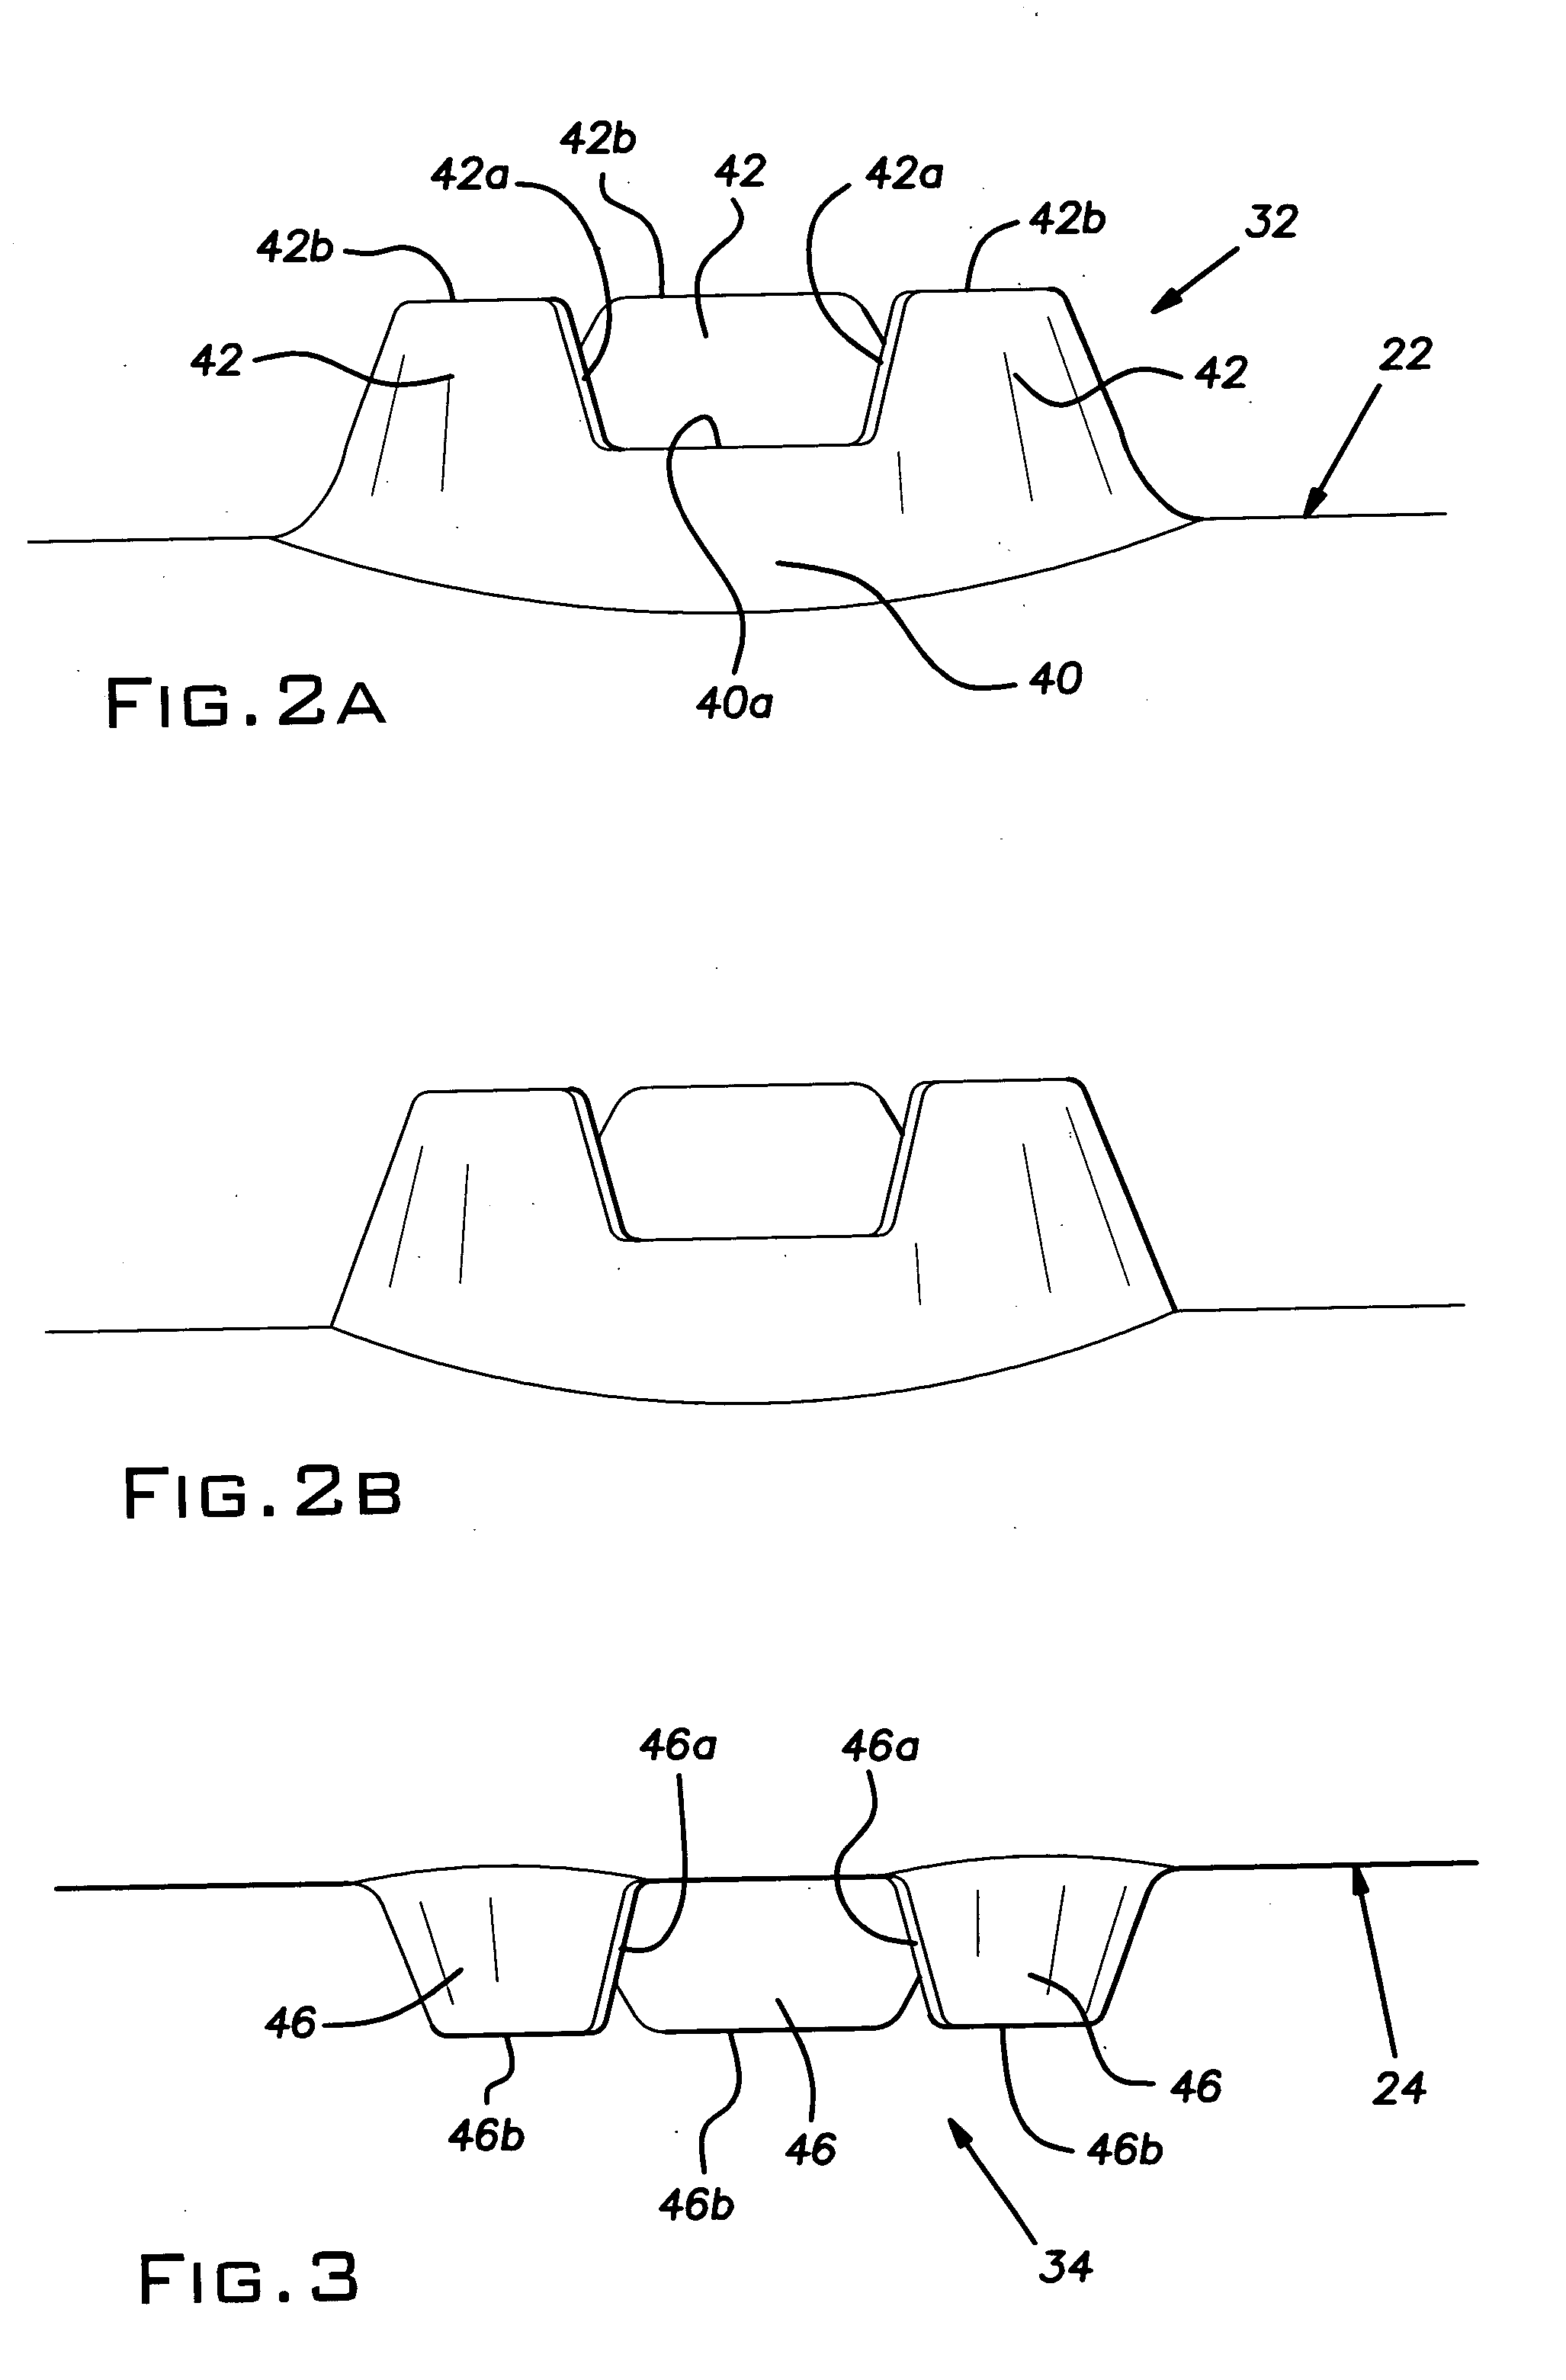 Anti-slip step for a motor vehicle and a method of forming the same